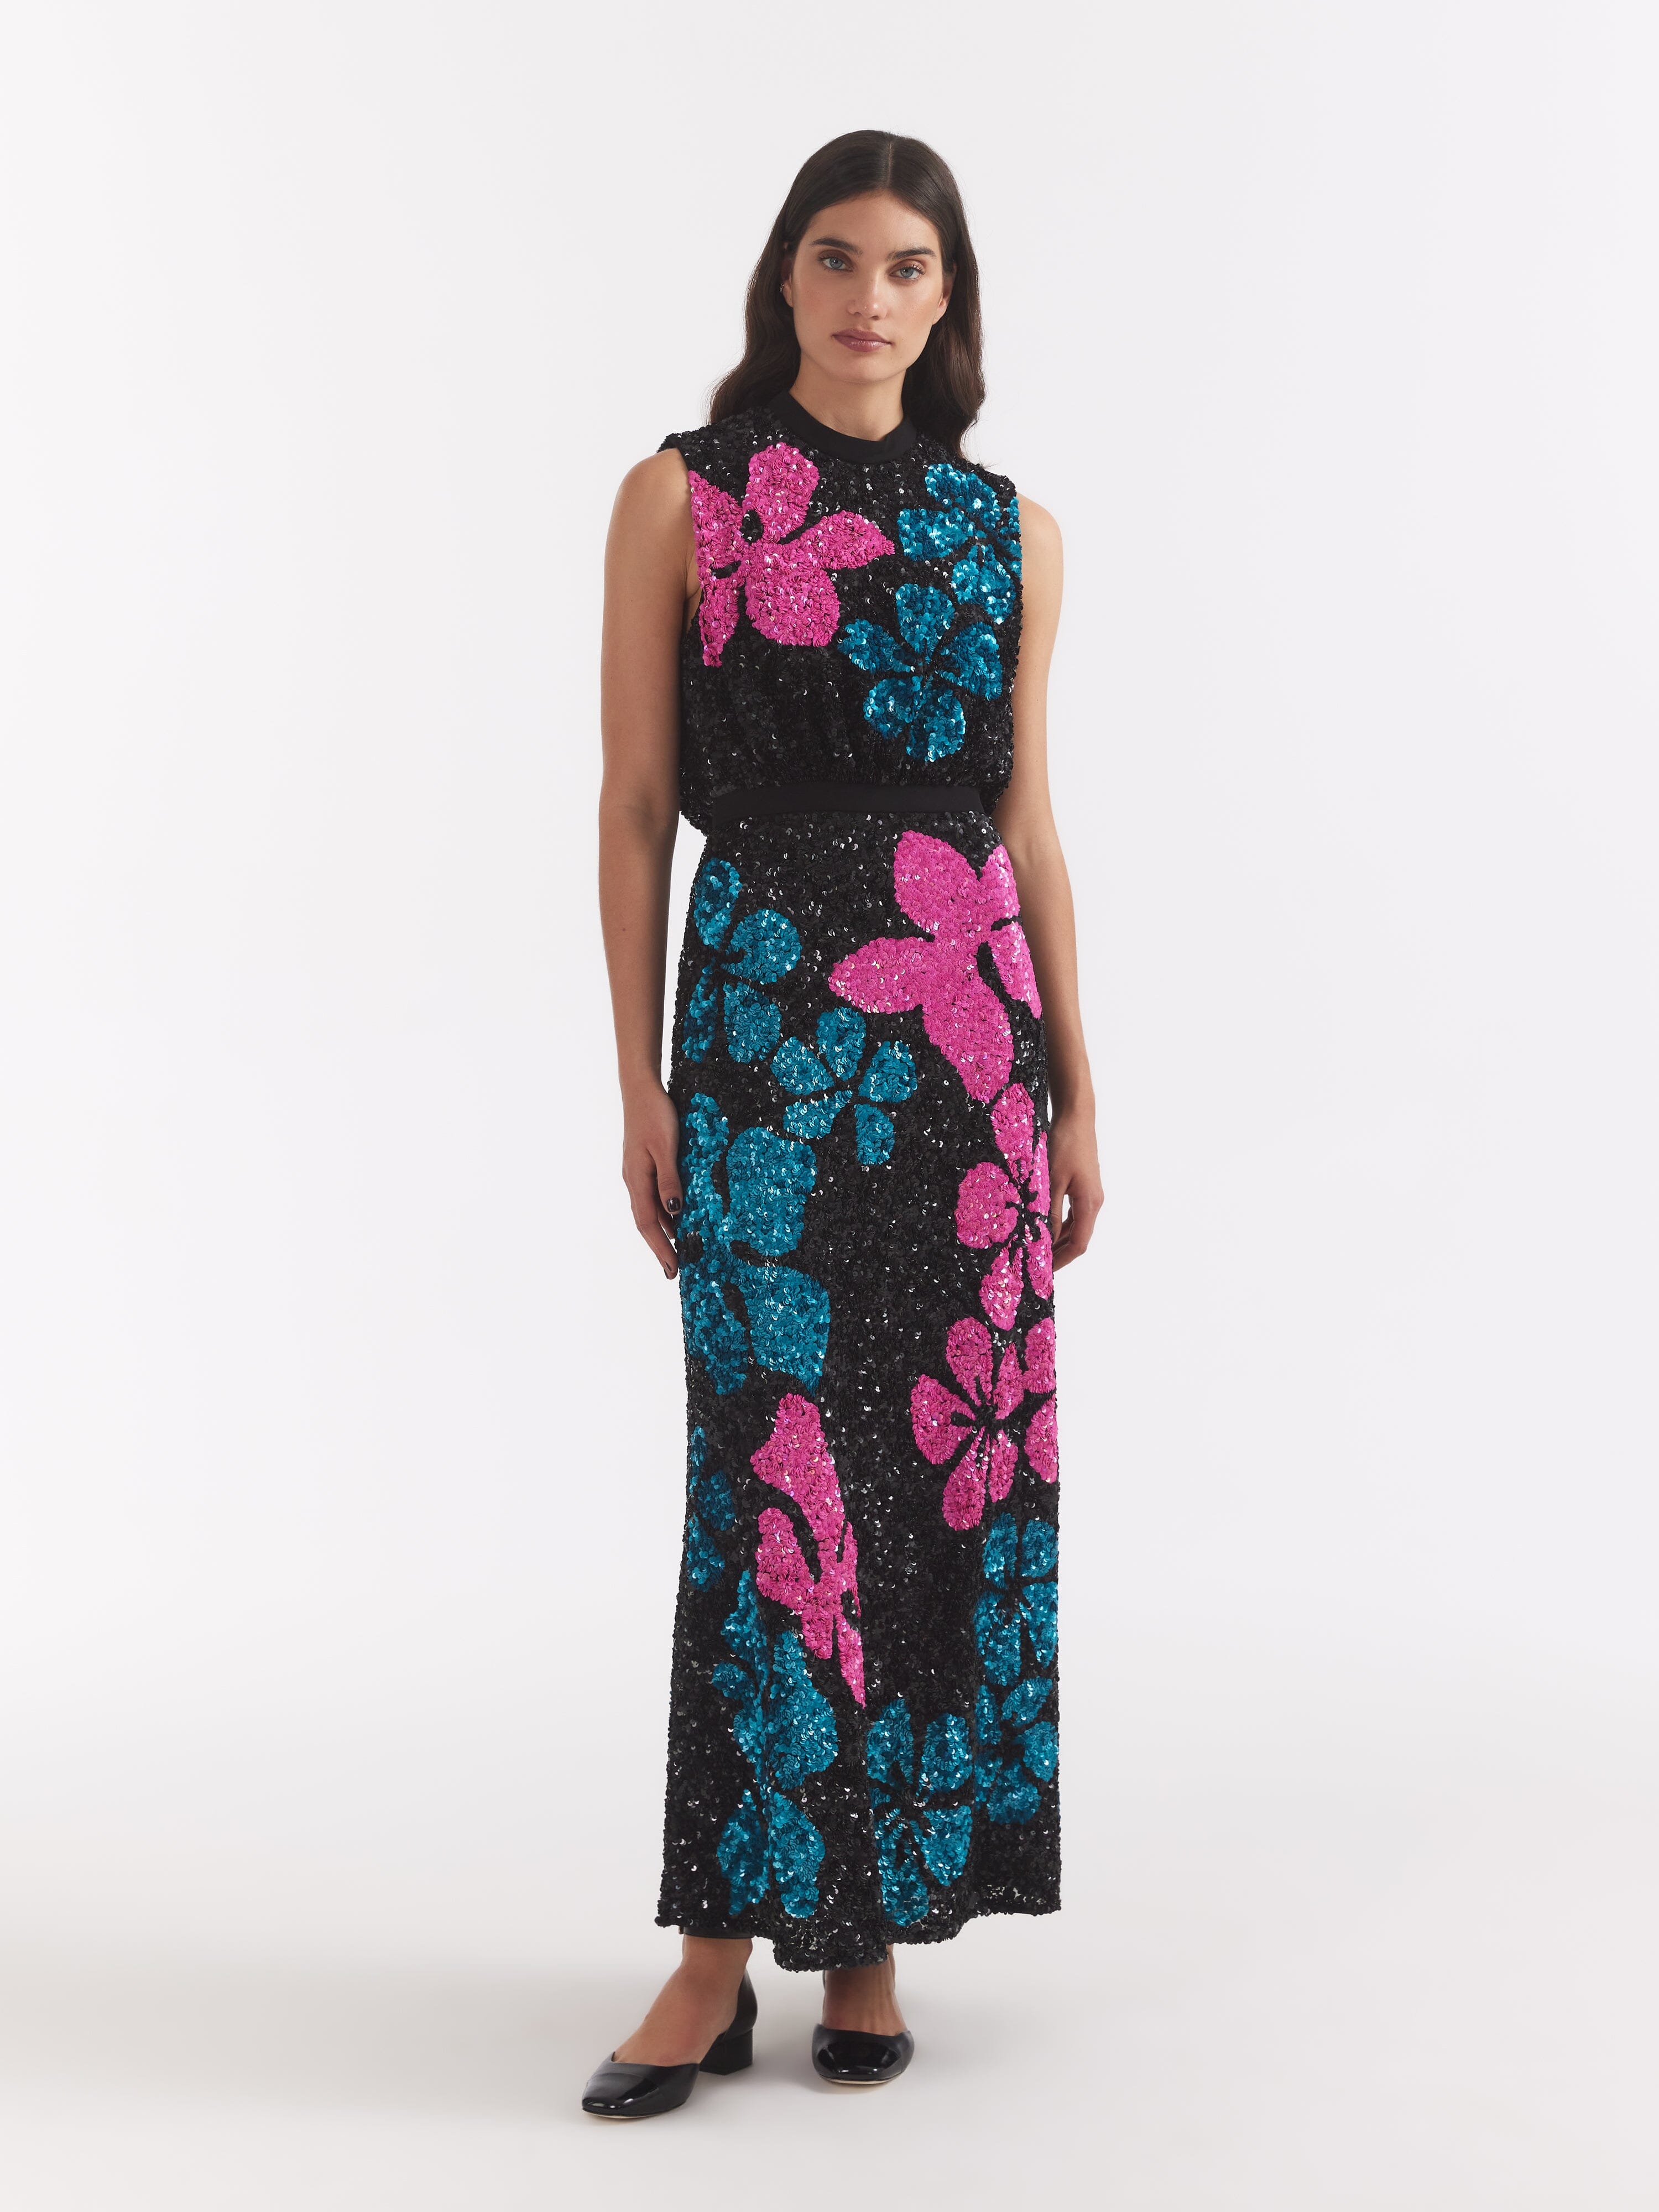 Fleur F Dress Sequin Hibiscus Embroidery